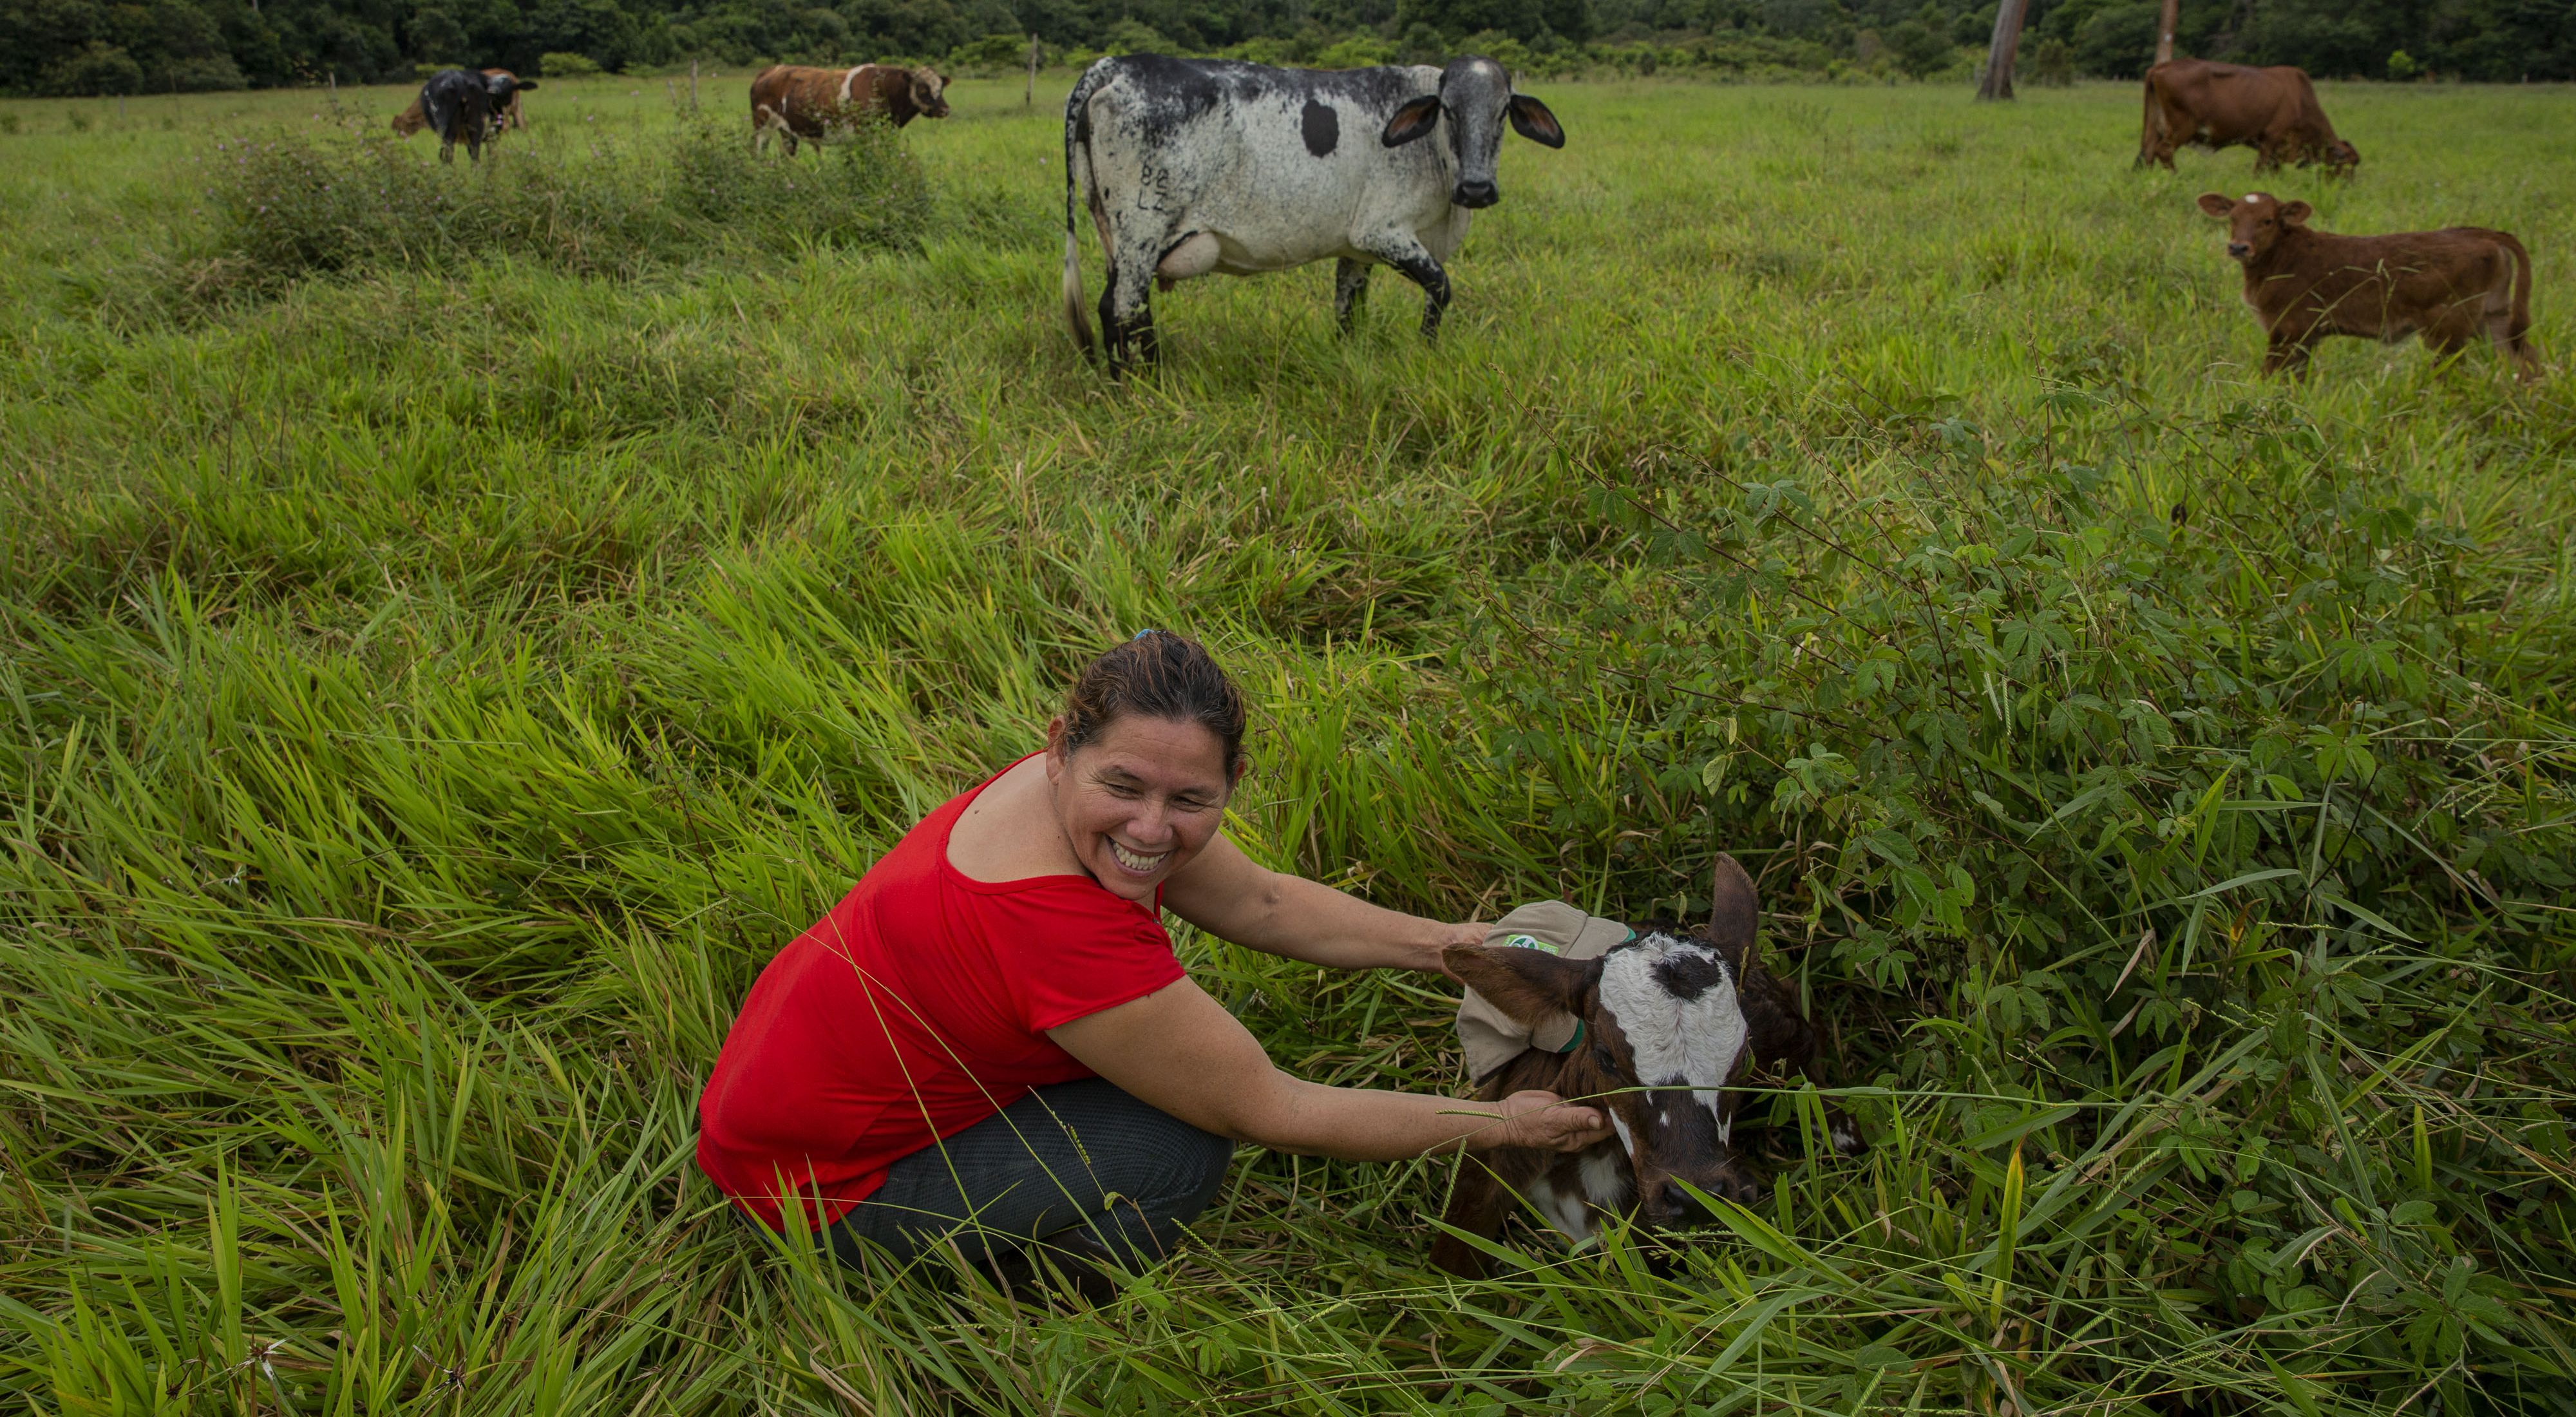 Mercedes Murillo Gutierrez attends to cows on her farm in Meta, Colombia